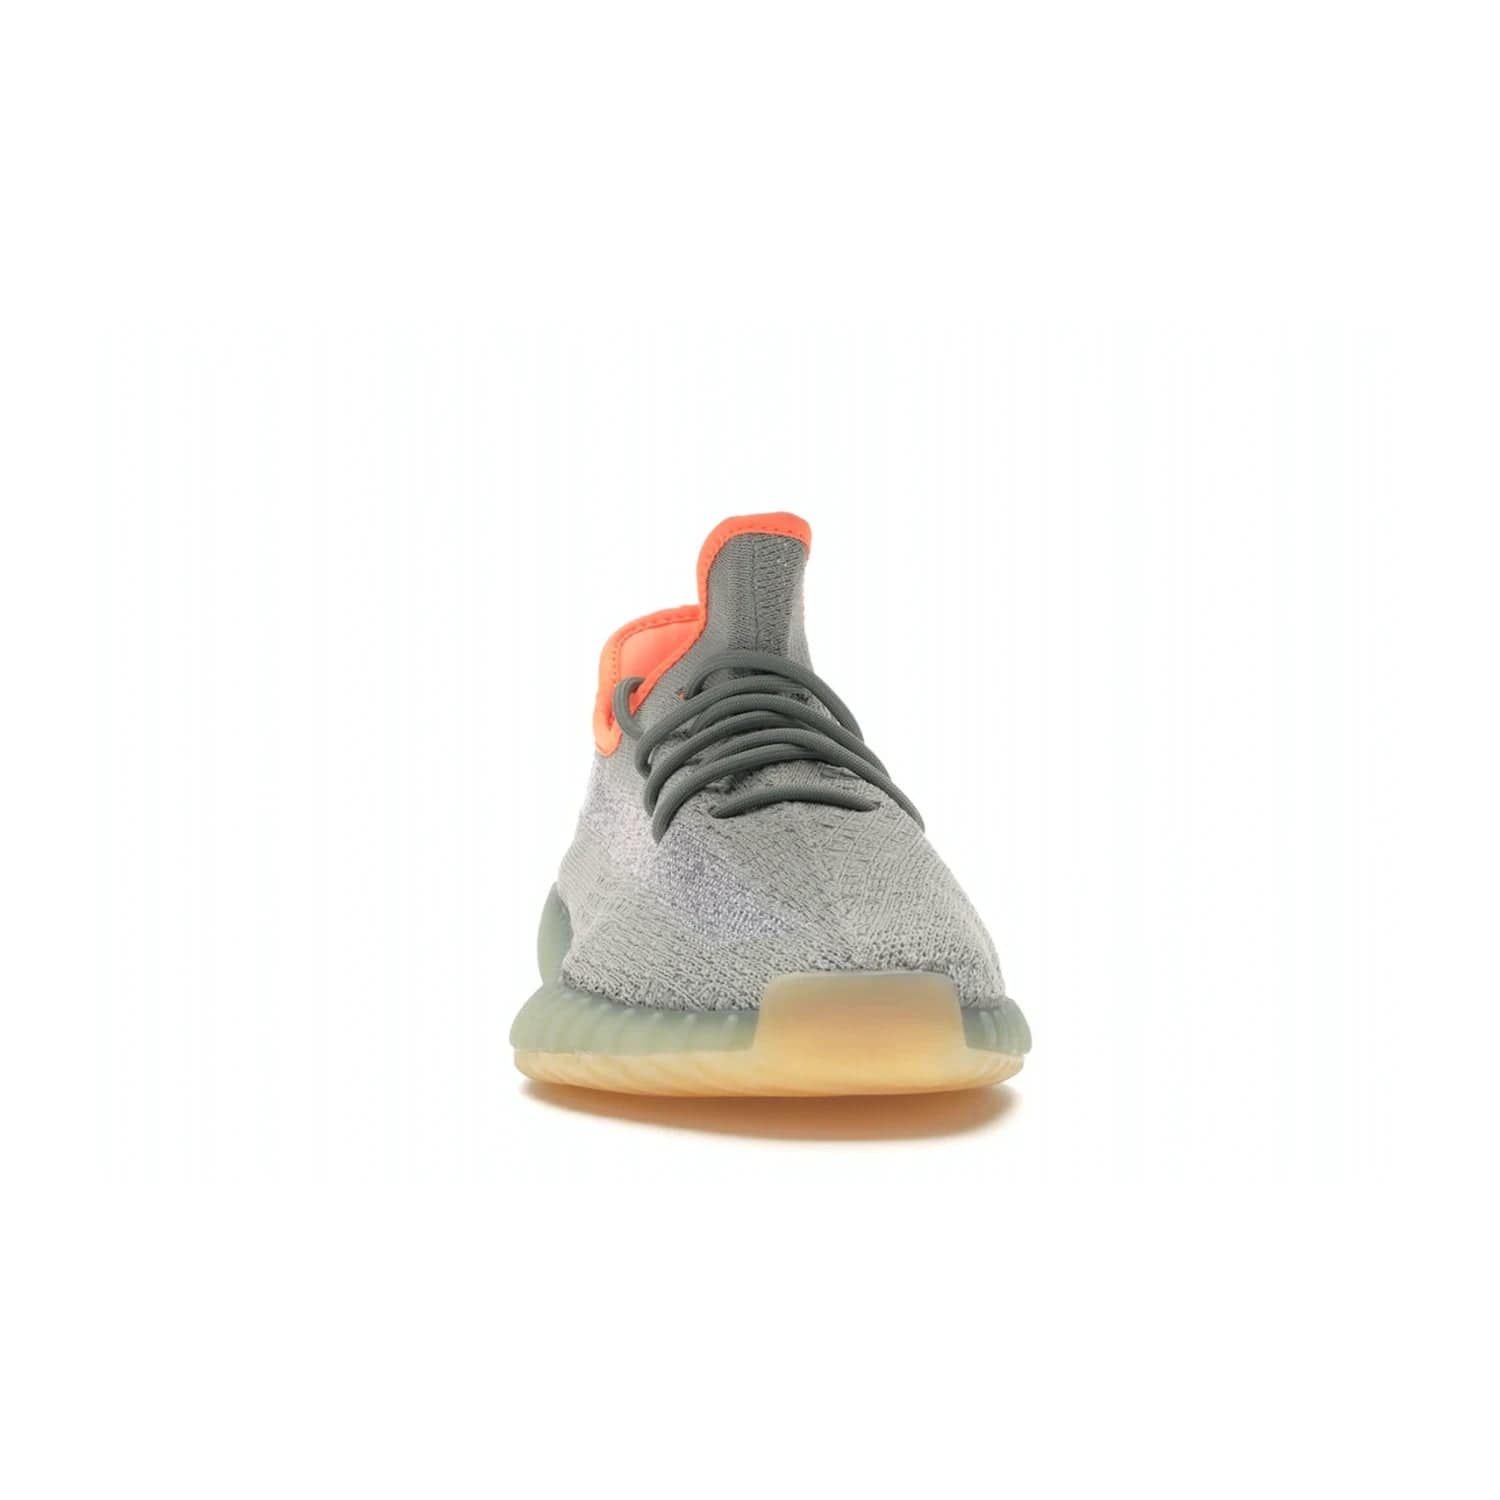 adidas Yeezy Boost 350 V2 Desert Sage - Image 9 - Only at www.BallersClubKickz.com - Upgrade your style with the adidas Yeezy Boost 350 V2 Desert Sage. This 350V2 features a Desert Sage primeknit upper with tonal side stripe, and an orange-highlighted translucent Boost cushioning sole. Stay on-trend in effortless style.